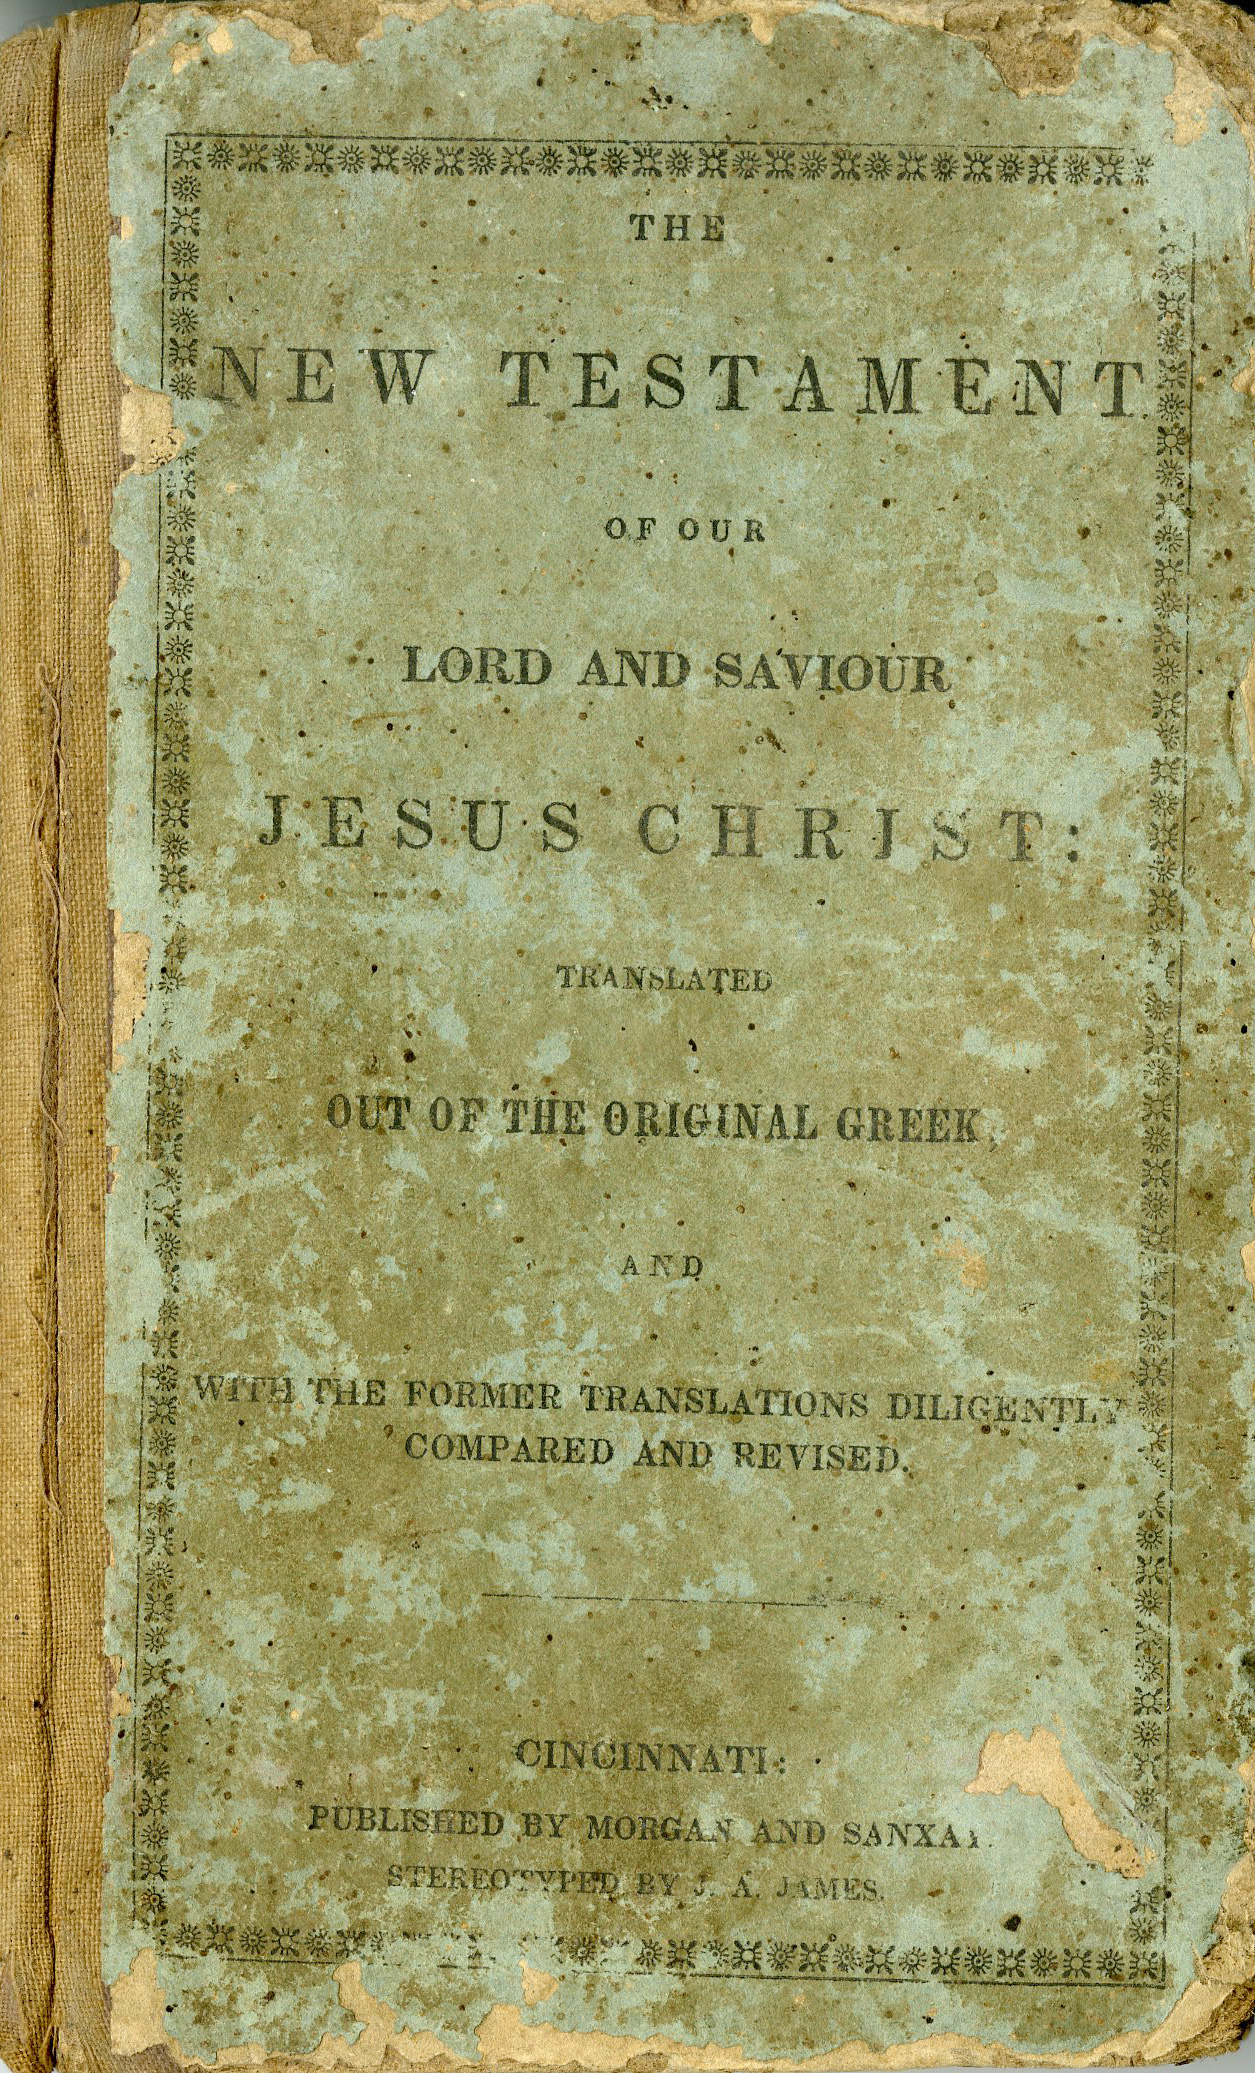 [Front cover]: “The New Testament of our Lord and Saviour Jesus Christ, translated out of the original Greek; and with the former translations diligently compared and revised.” 